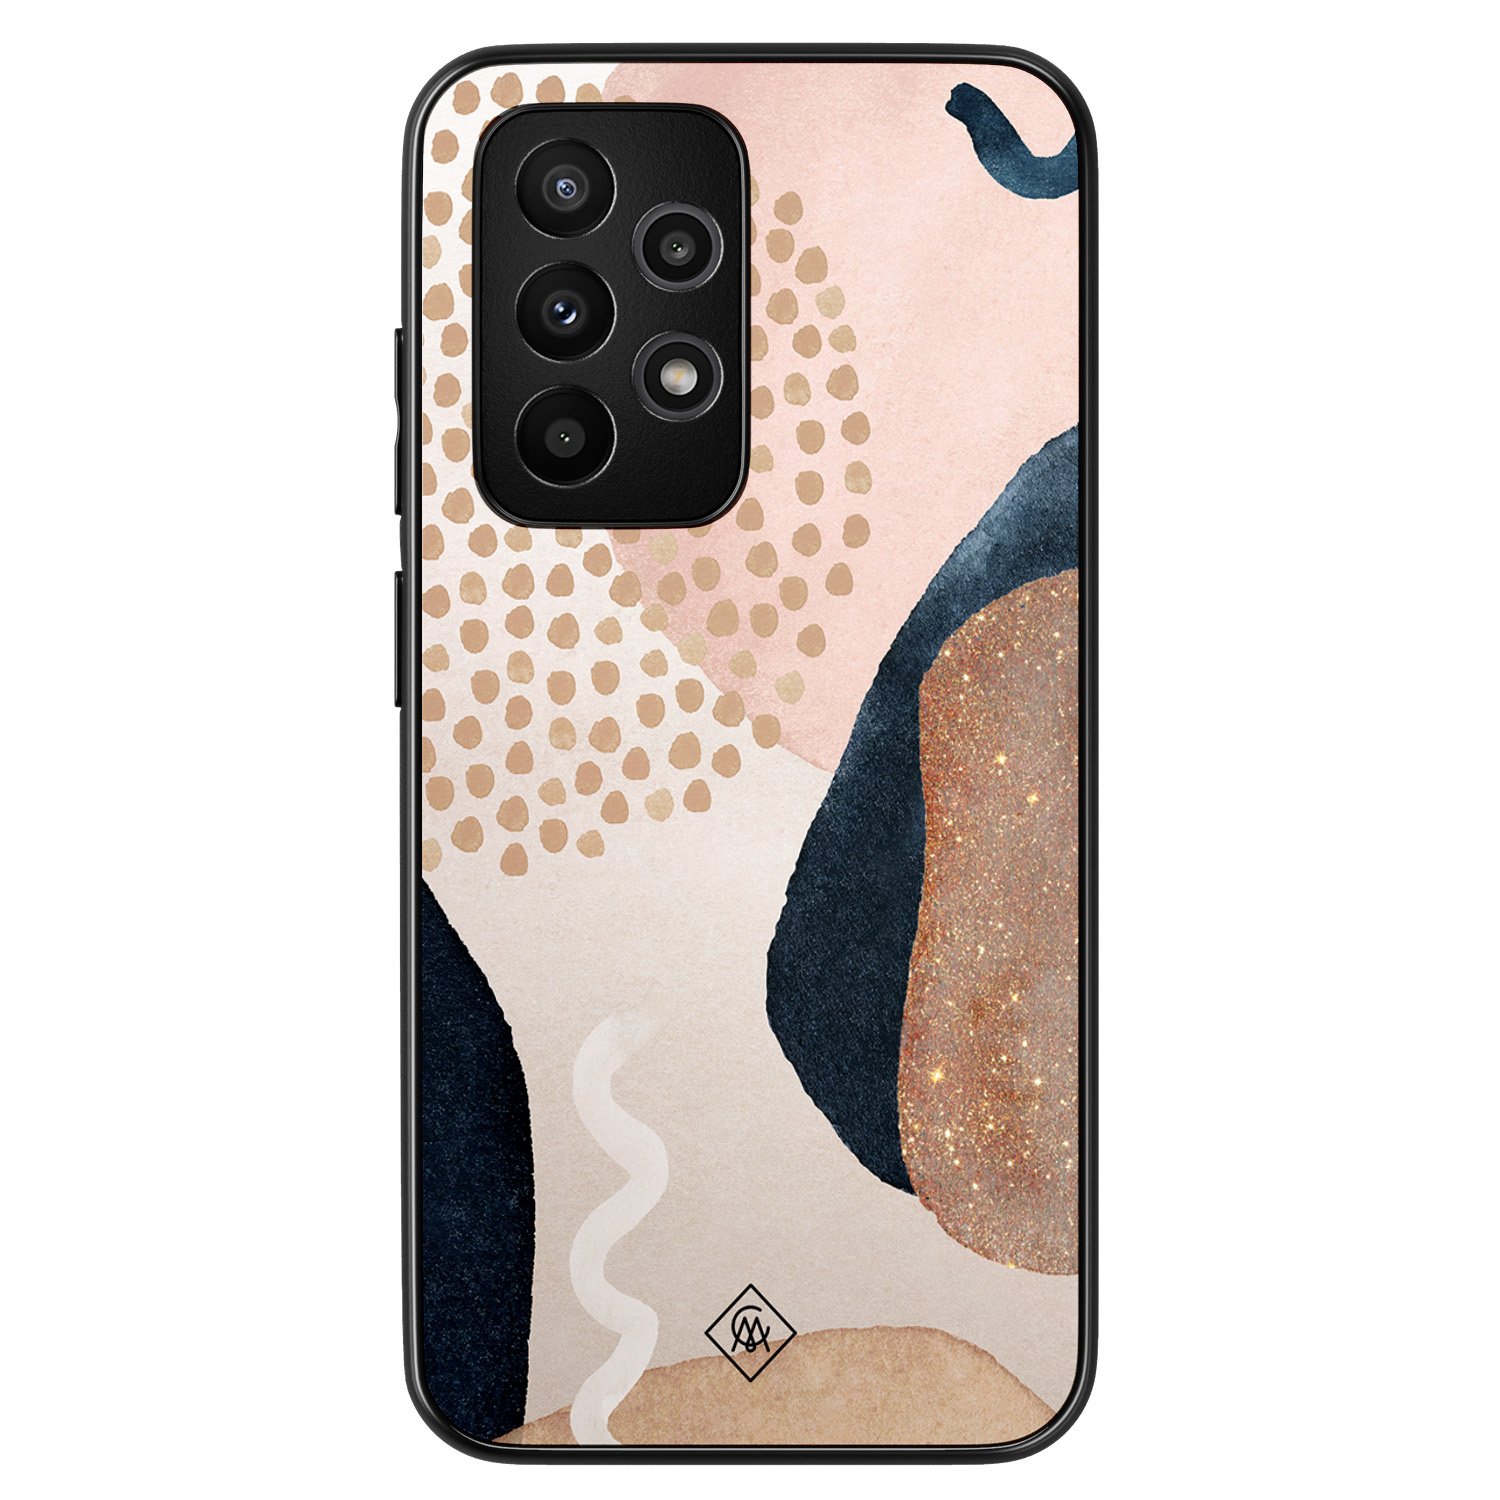 Samsung Galaxy A52 hoesje - Abstract dots